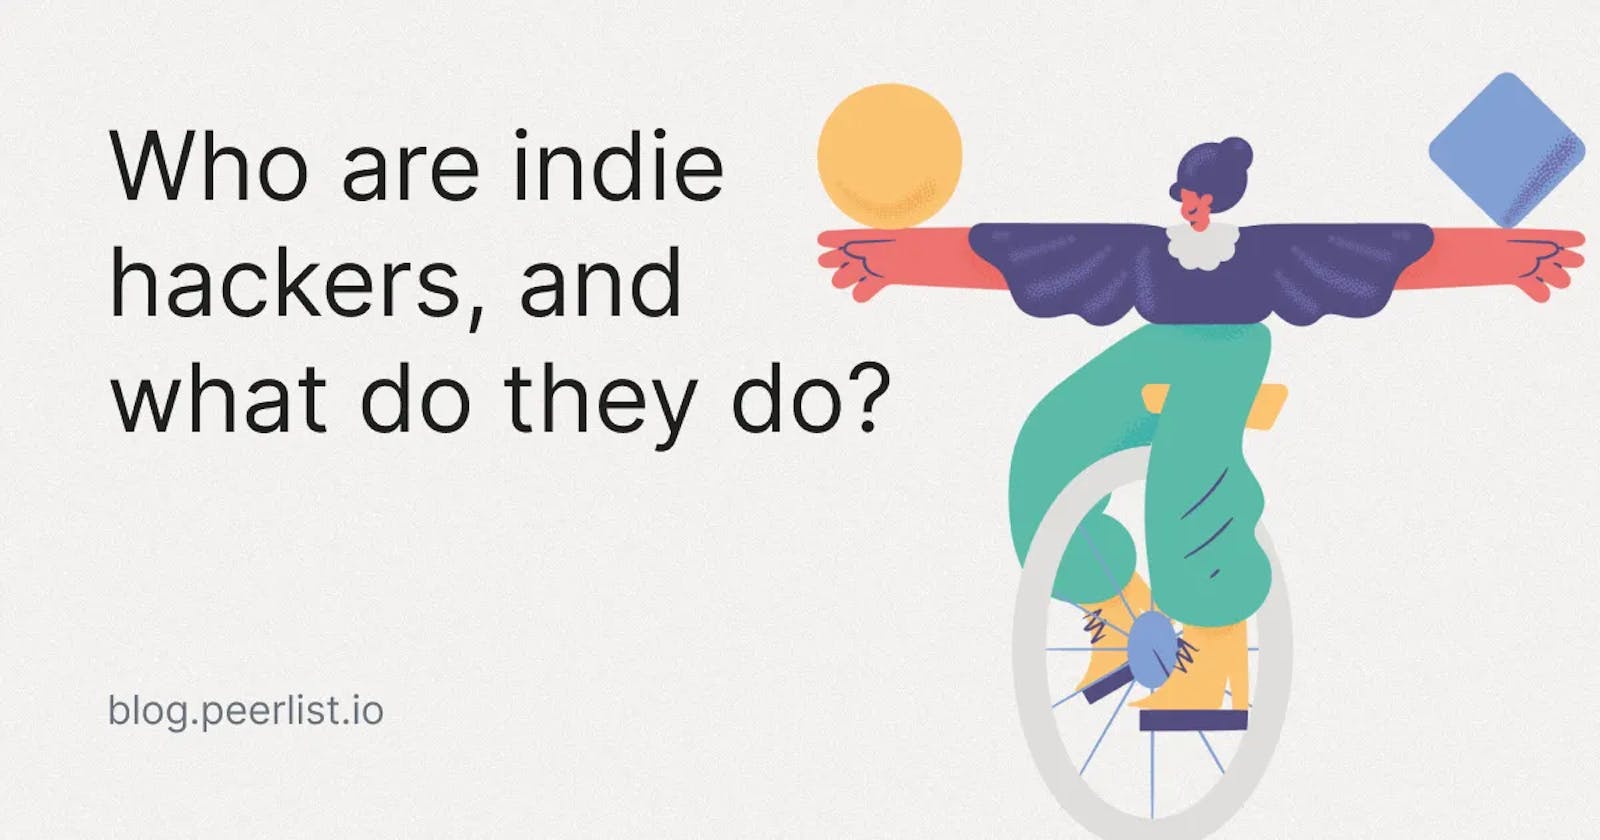 Who are indie hackers, and what do they do?